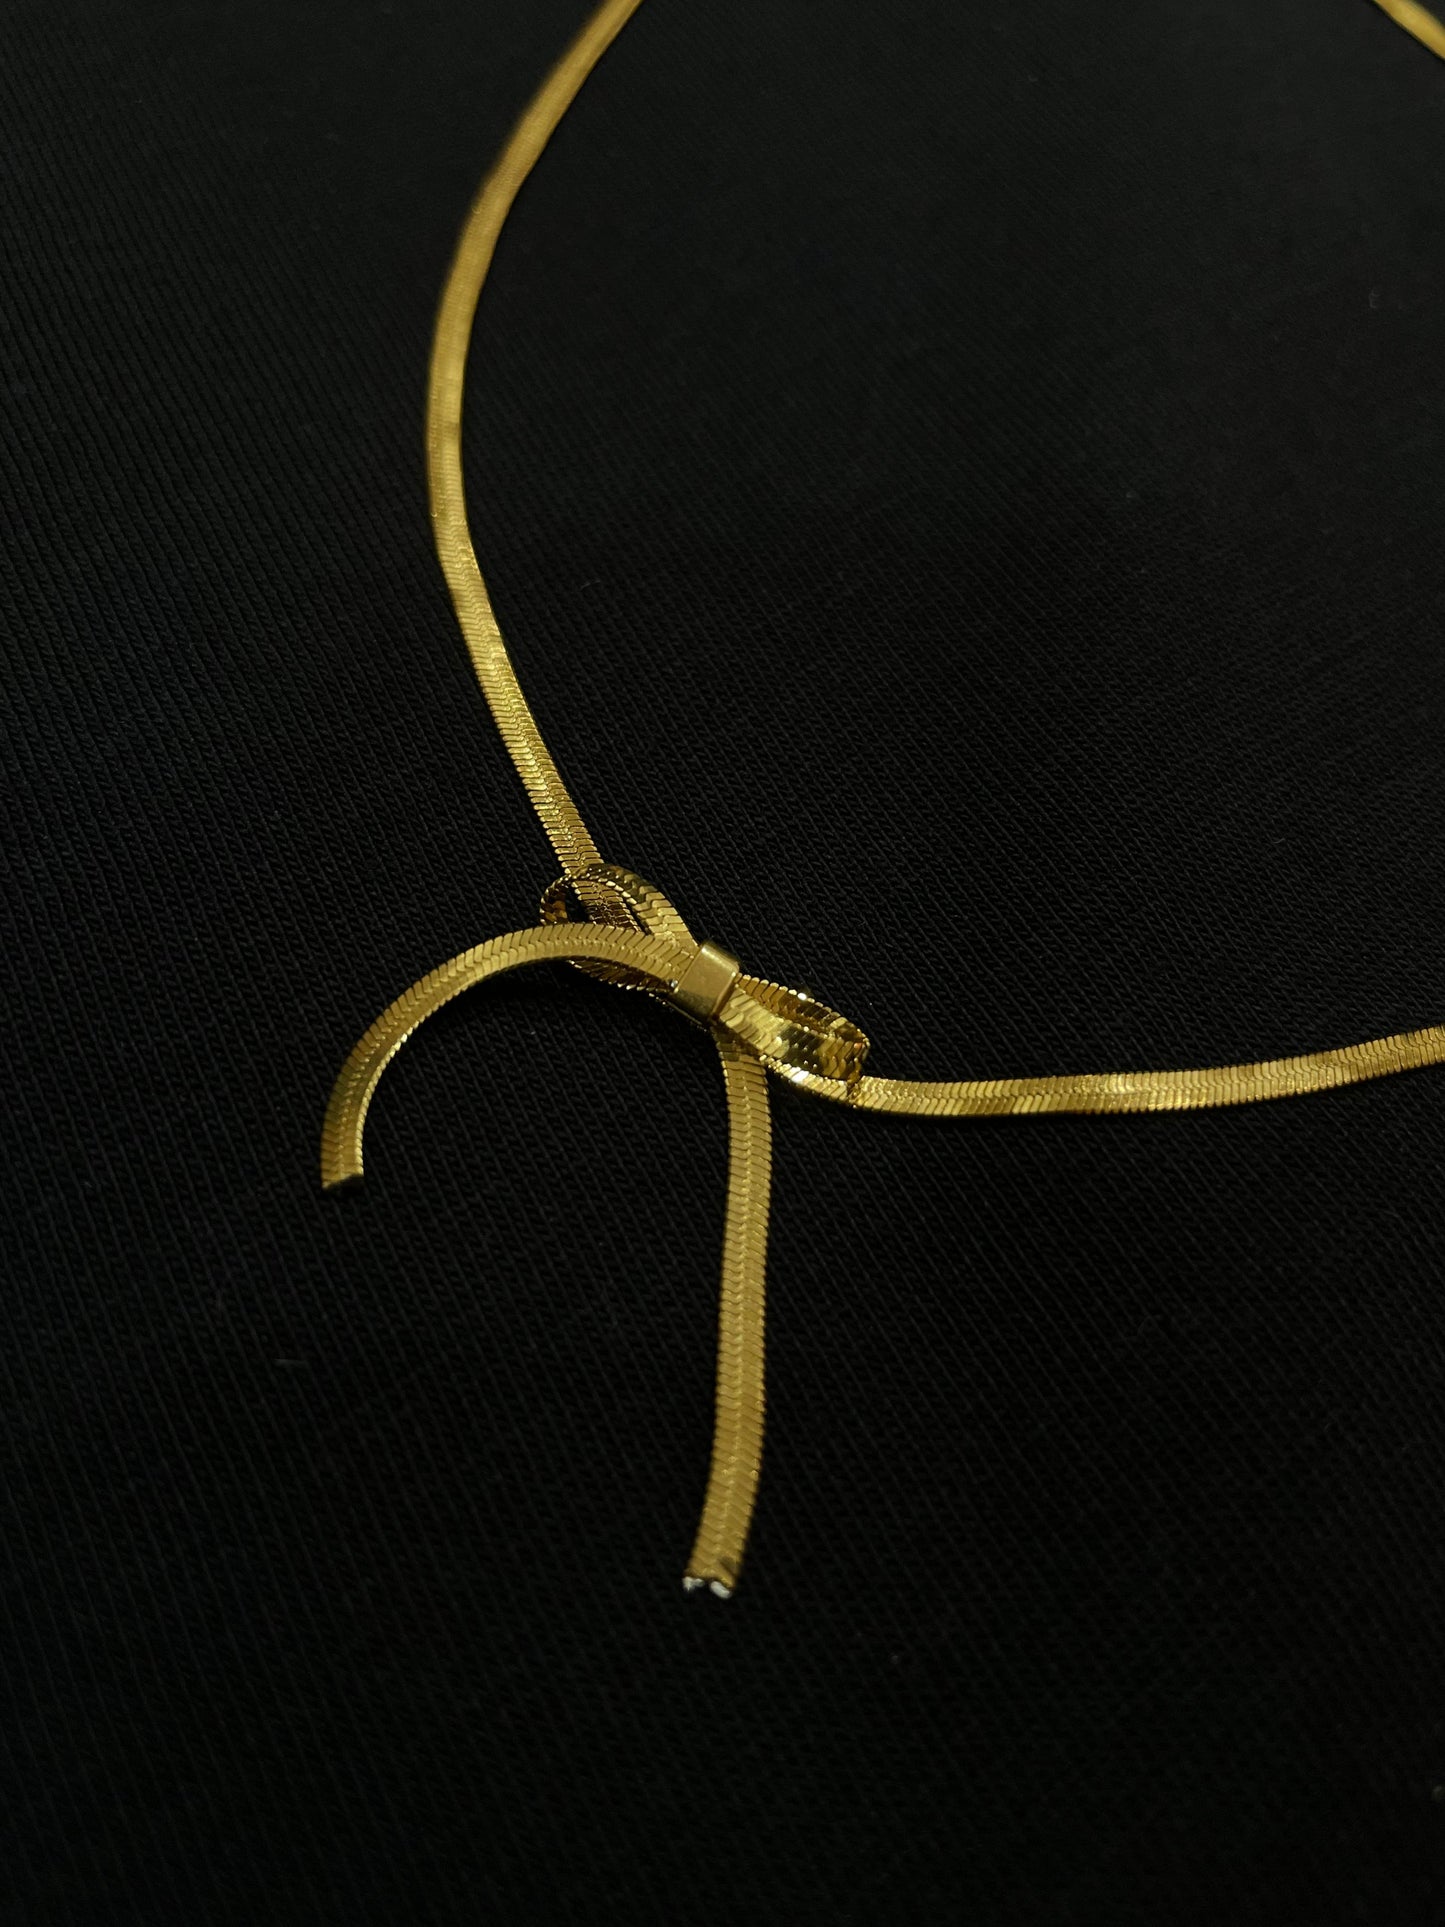 KATY BOW PREMIUM GOLD PLATED NECKLACE